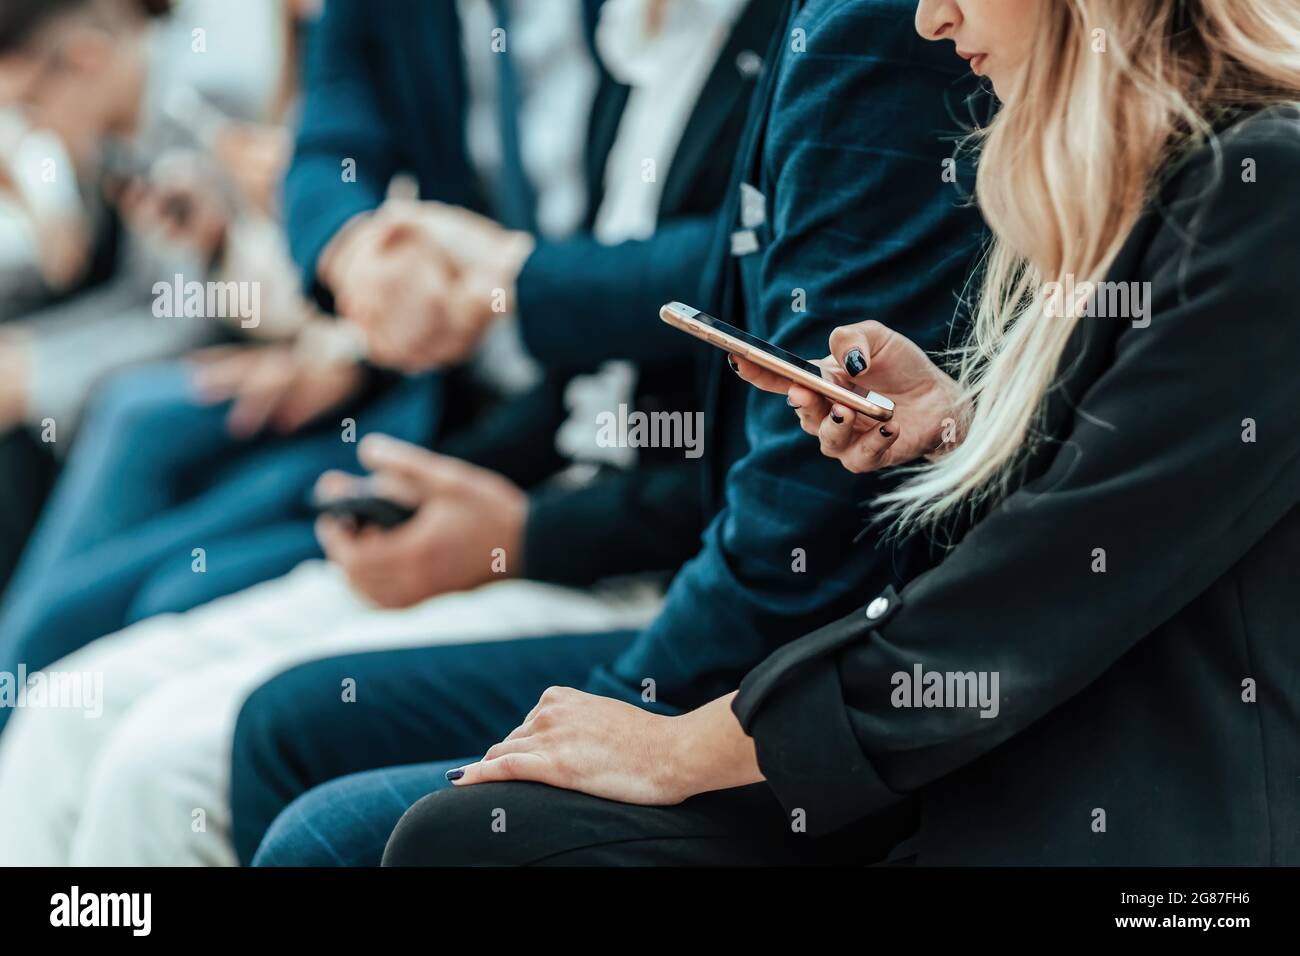 background image of a group of young people sitting in a queue Stock Photo